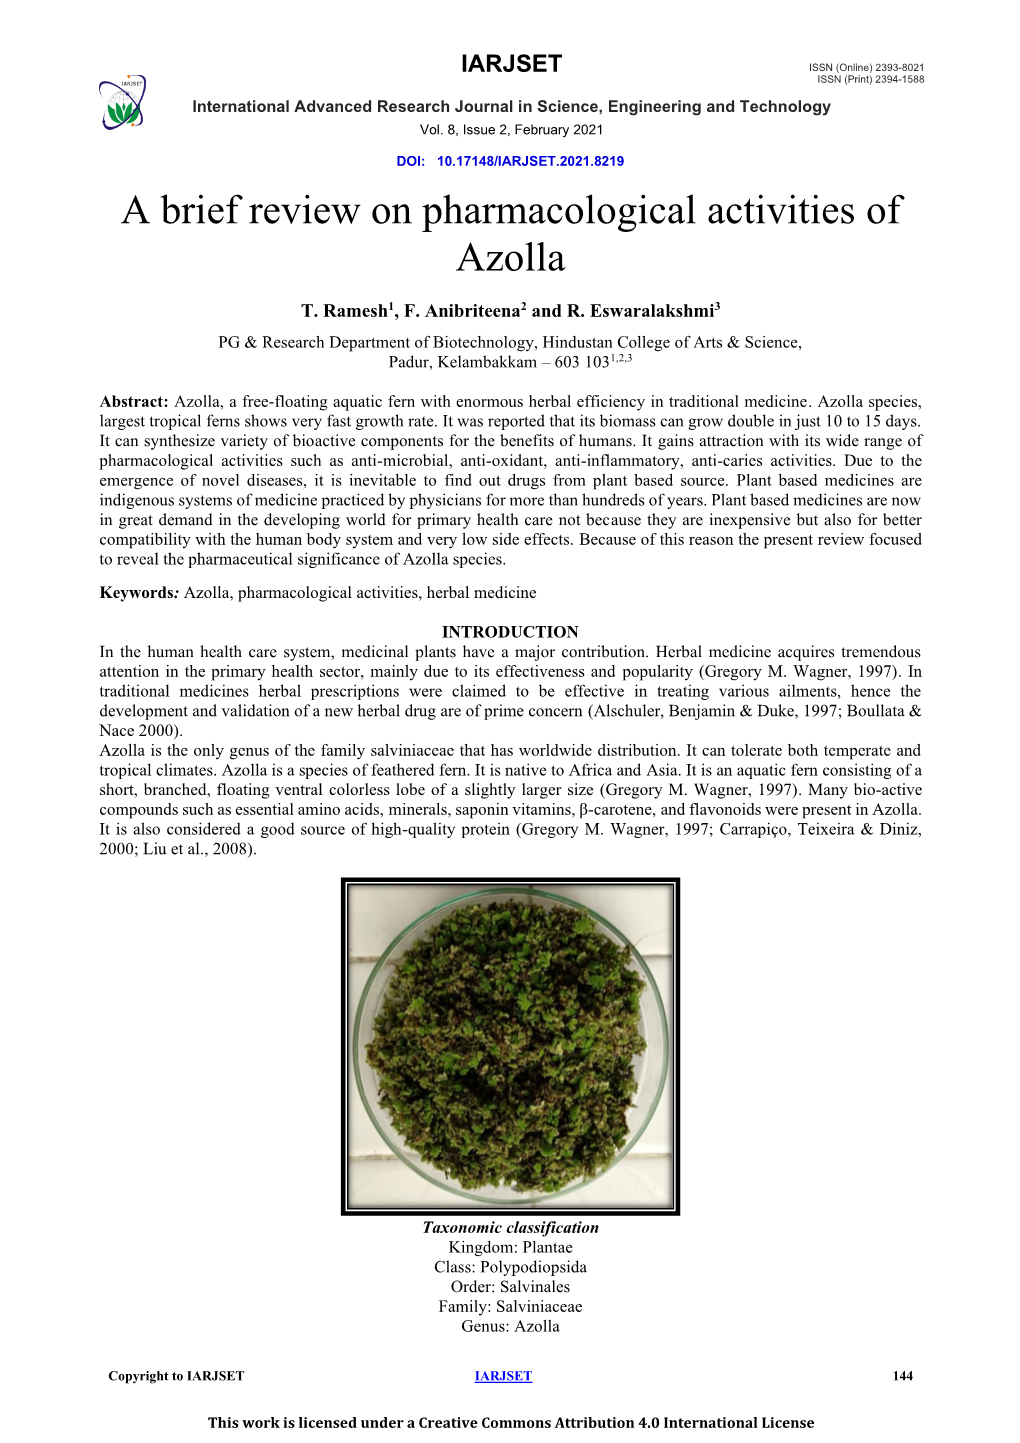 A Brief Review on Pharmacological Activities of Azolla